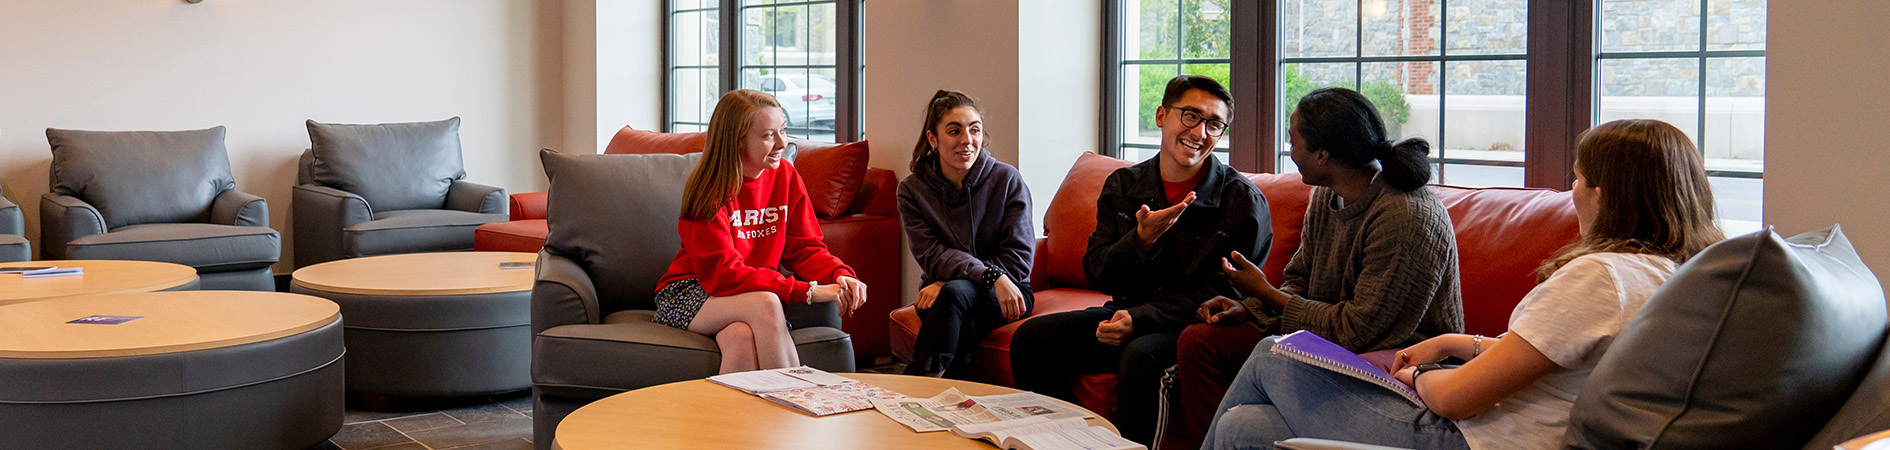 Photo of students socializing in residence hall lounge area